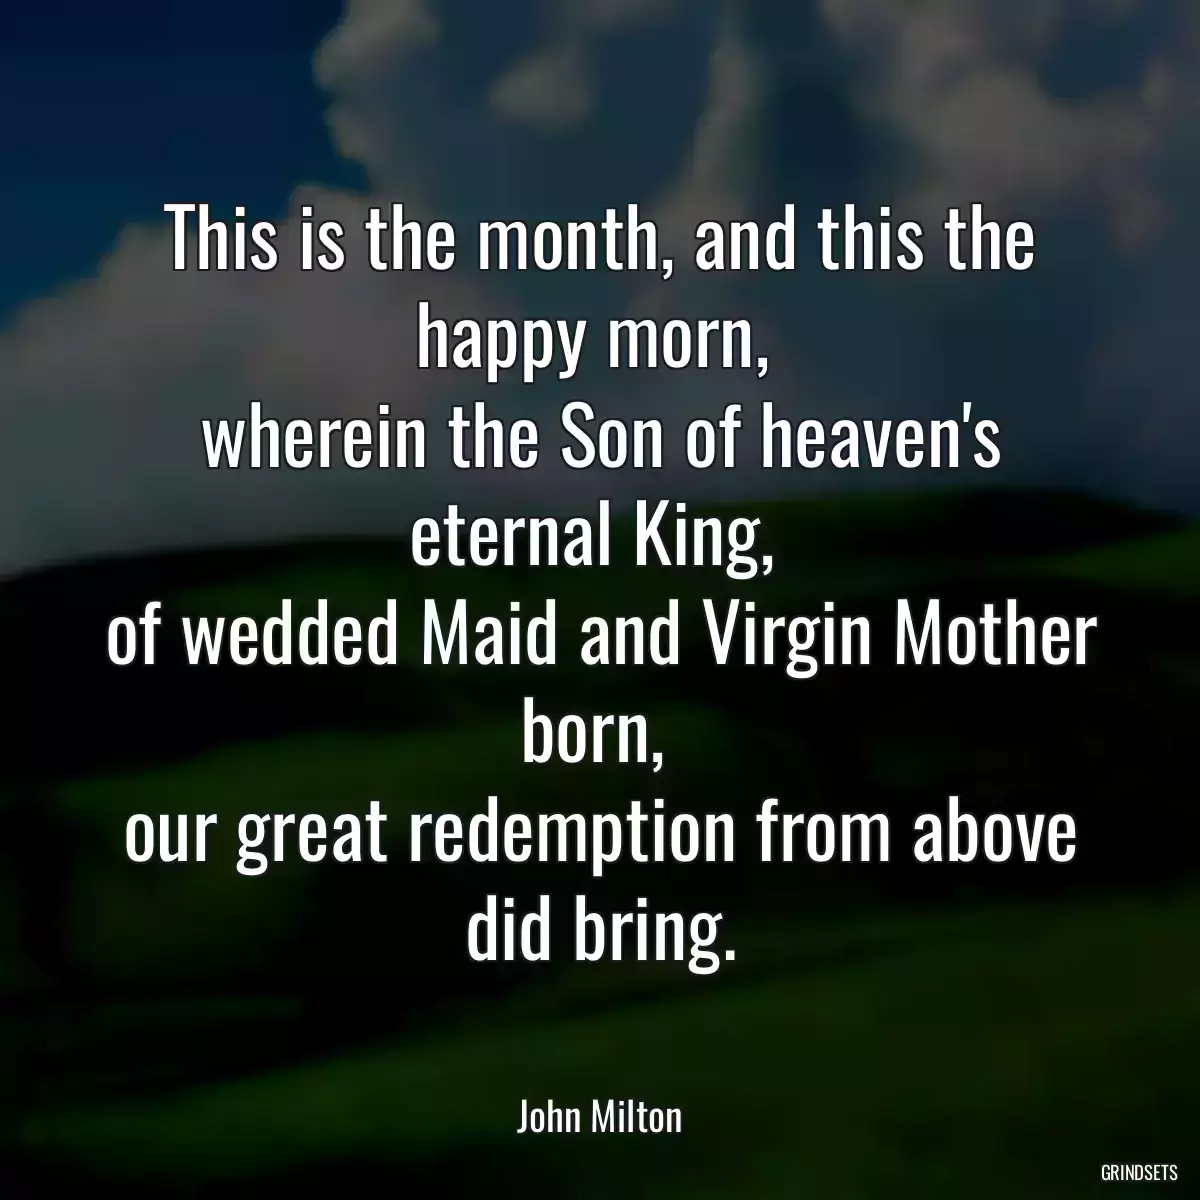 This is the month, and this the happy morn, 
wherein the Son of heaven\'s eternal King, 
of wedded Maid and Virgin Mother born, 
our great redemption from above did bring.